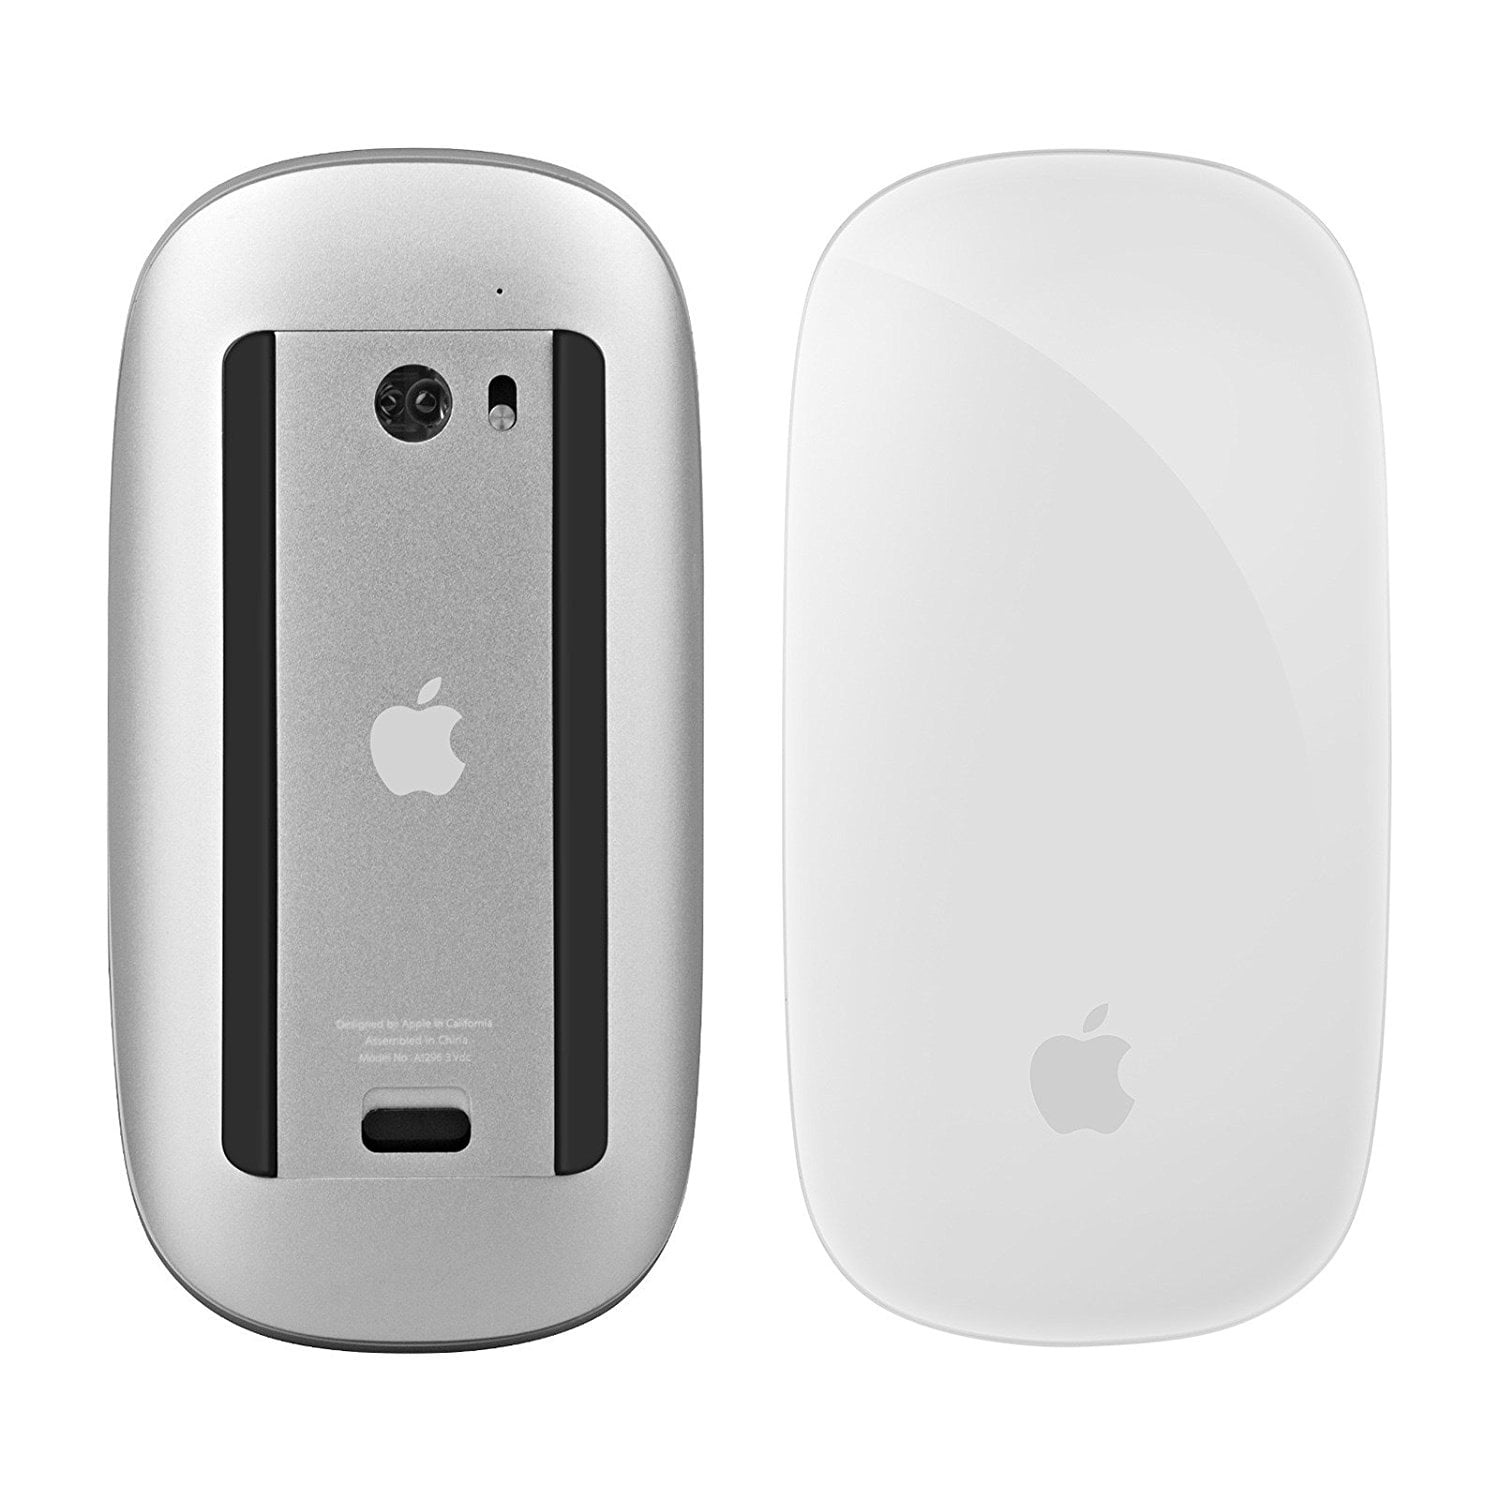 Restored Apple Magic Bluetooth A1296 Laser MB829LL/A (Refurbished) - White Mouse Wireless